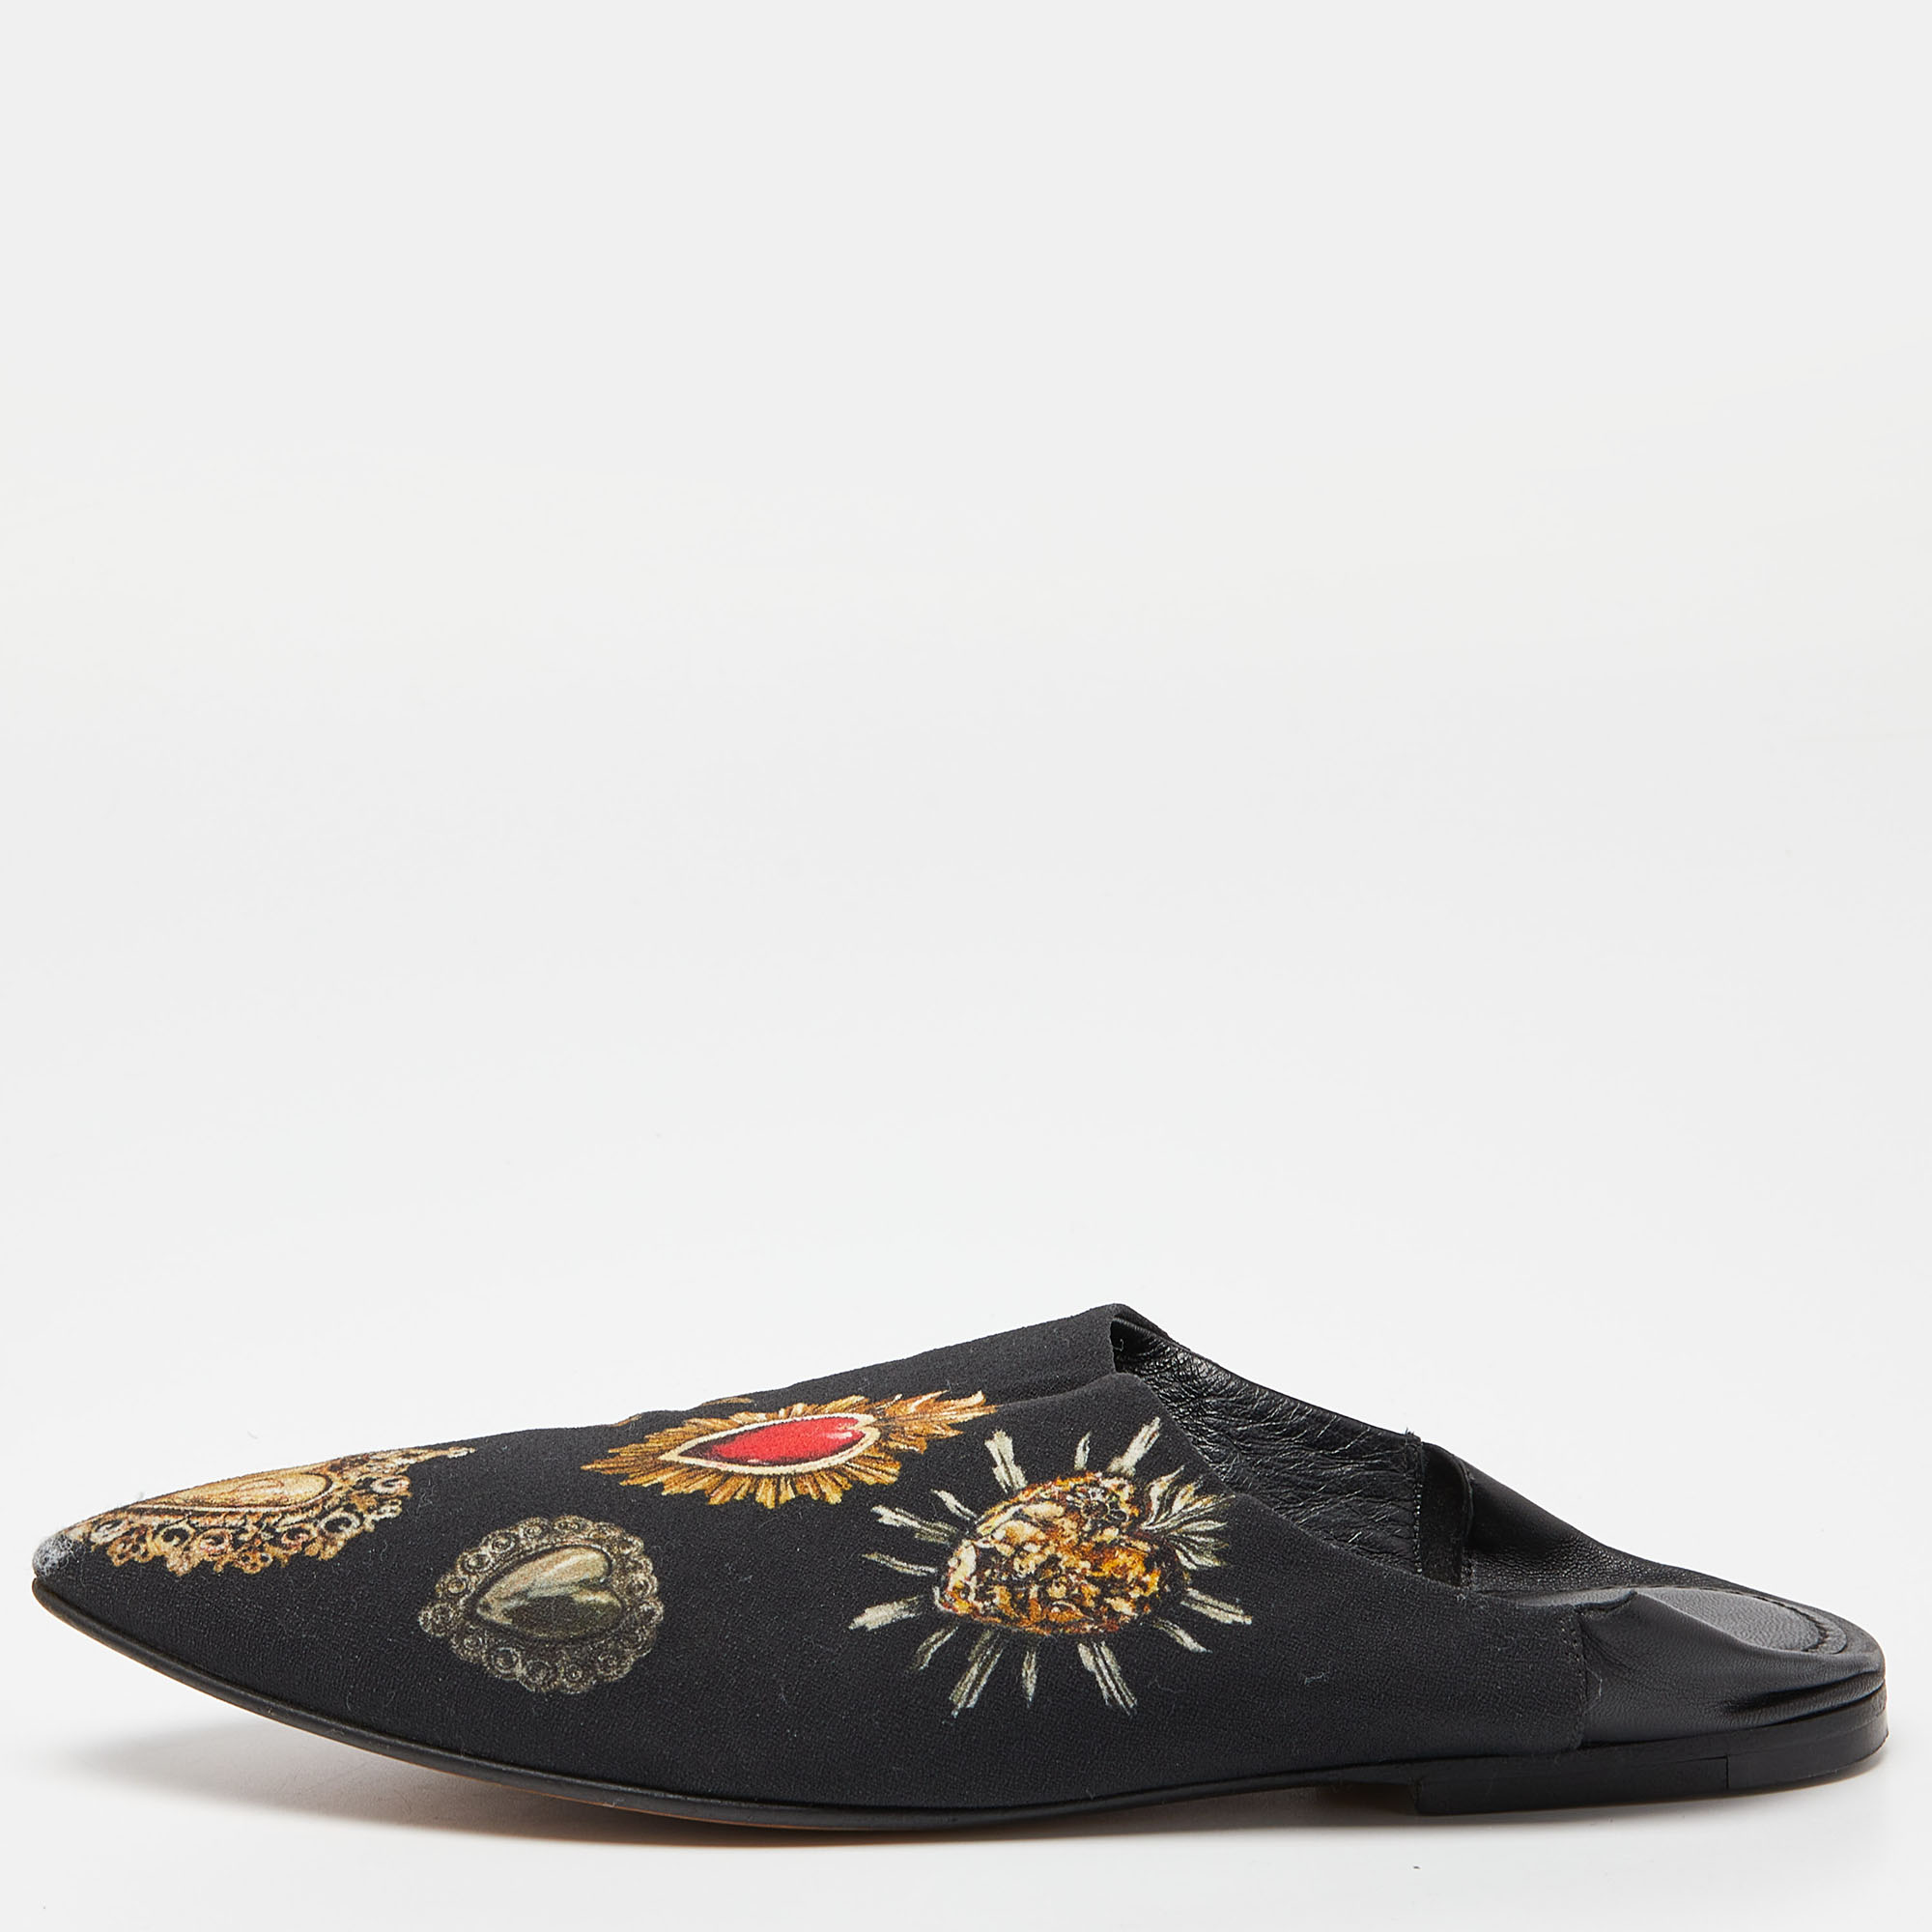 Pre-owned Dolce & Gabbana Black Printed Fabric Slide Mules Size 38.5